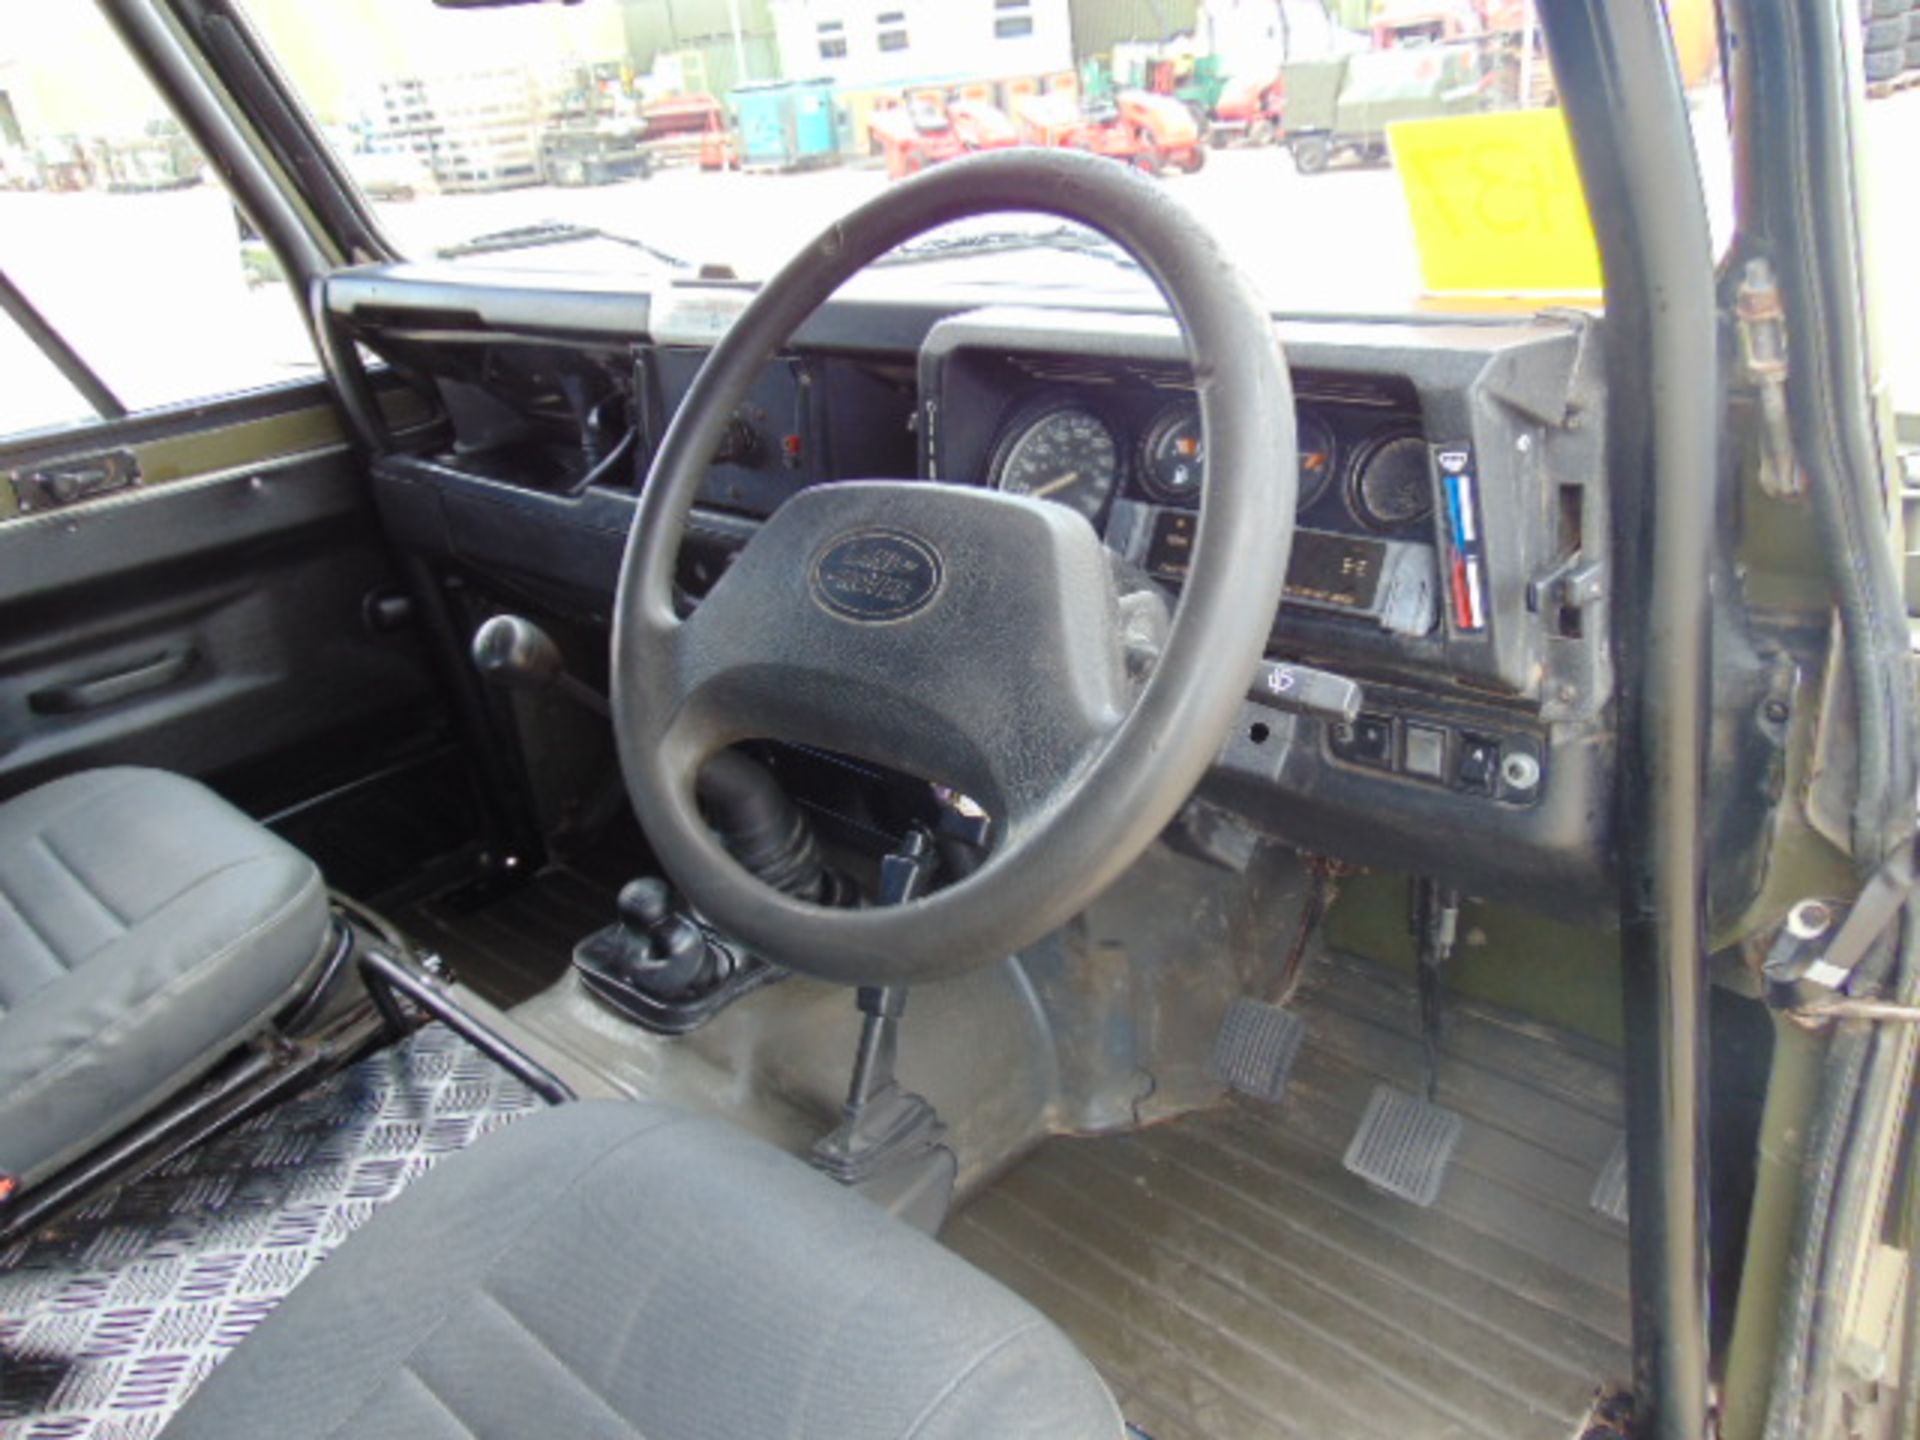 Military Specification Land Rover Wolf 90 Hard Top - Image 10 of 24